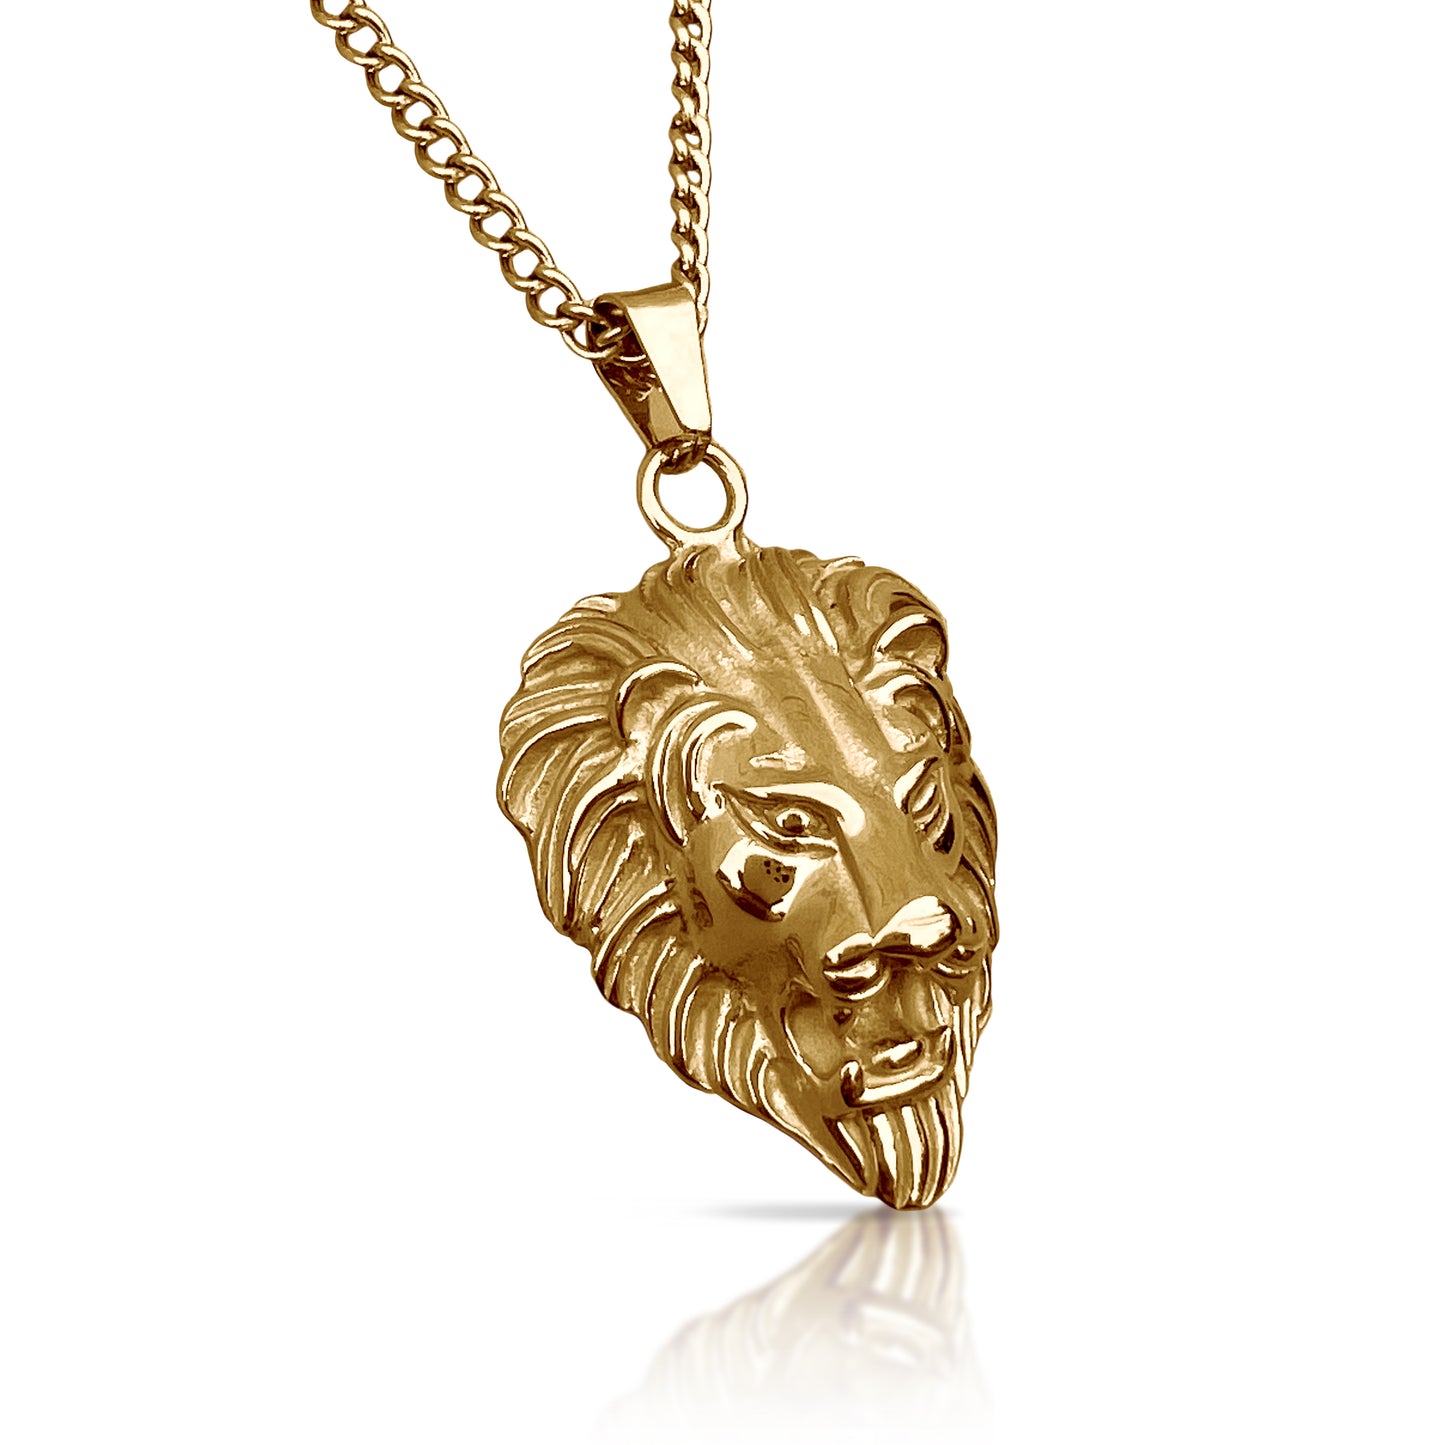 Lion Pendant With Chain Necklace - 14K Gold Plated Stainless Steel